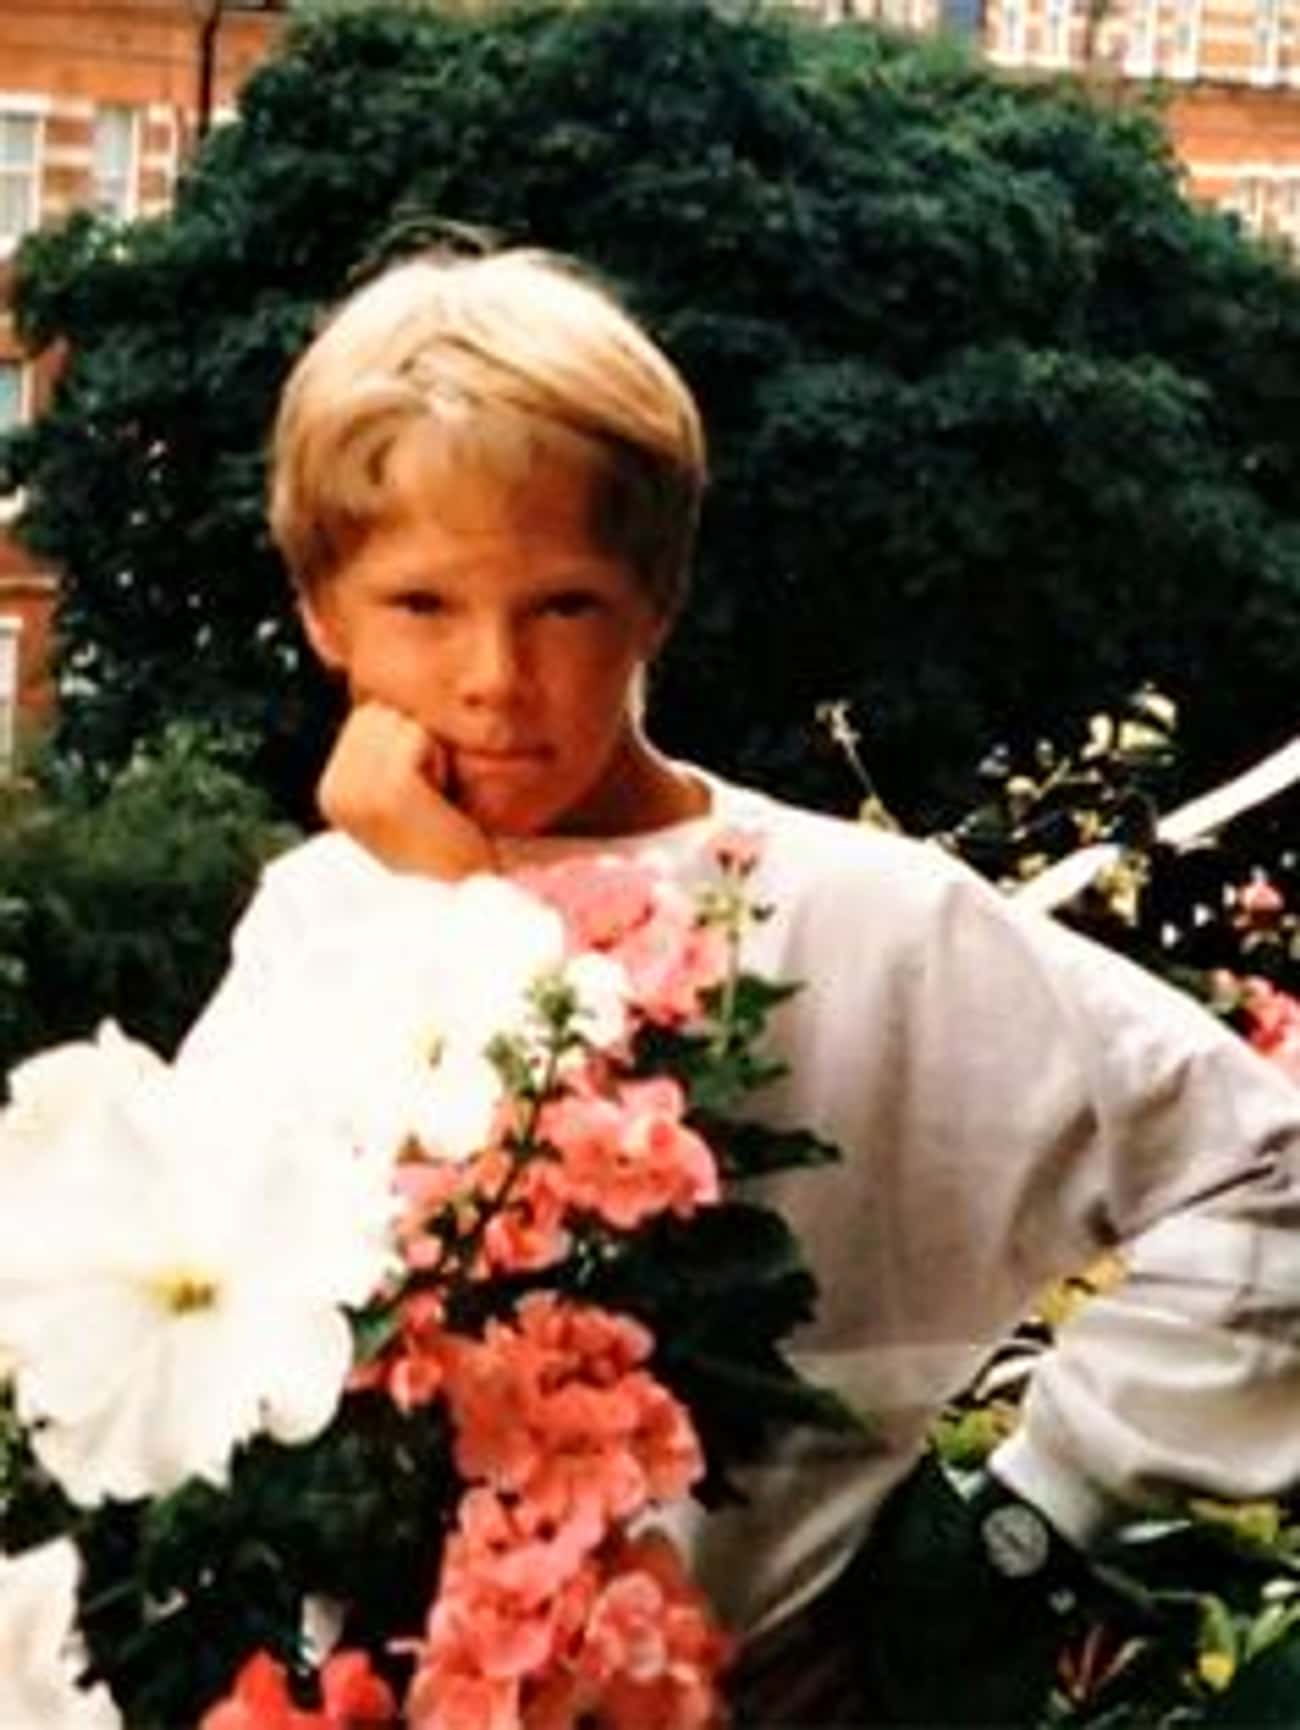 Young Benedict Cumberbatch as a Child